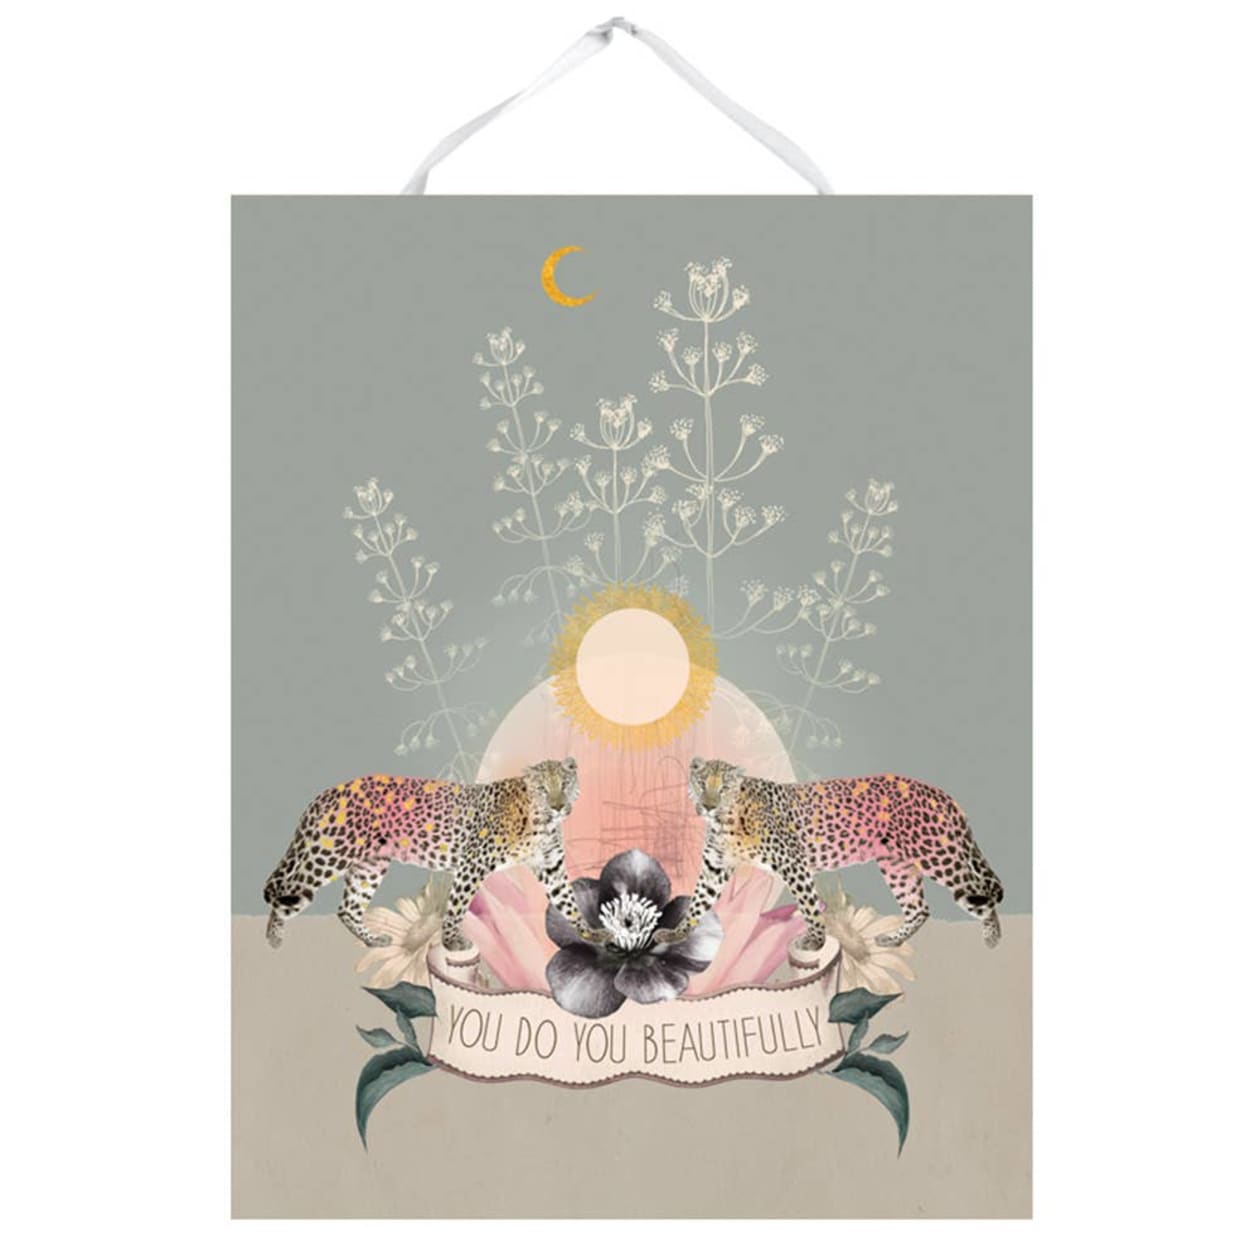 Twin Leopards 11" x 14" Art Print | Pre-Hung with Silk Ribbon for Easy Hanging